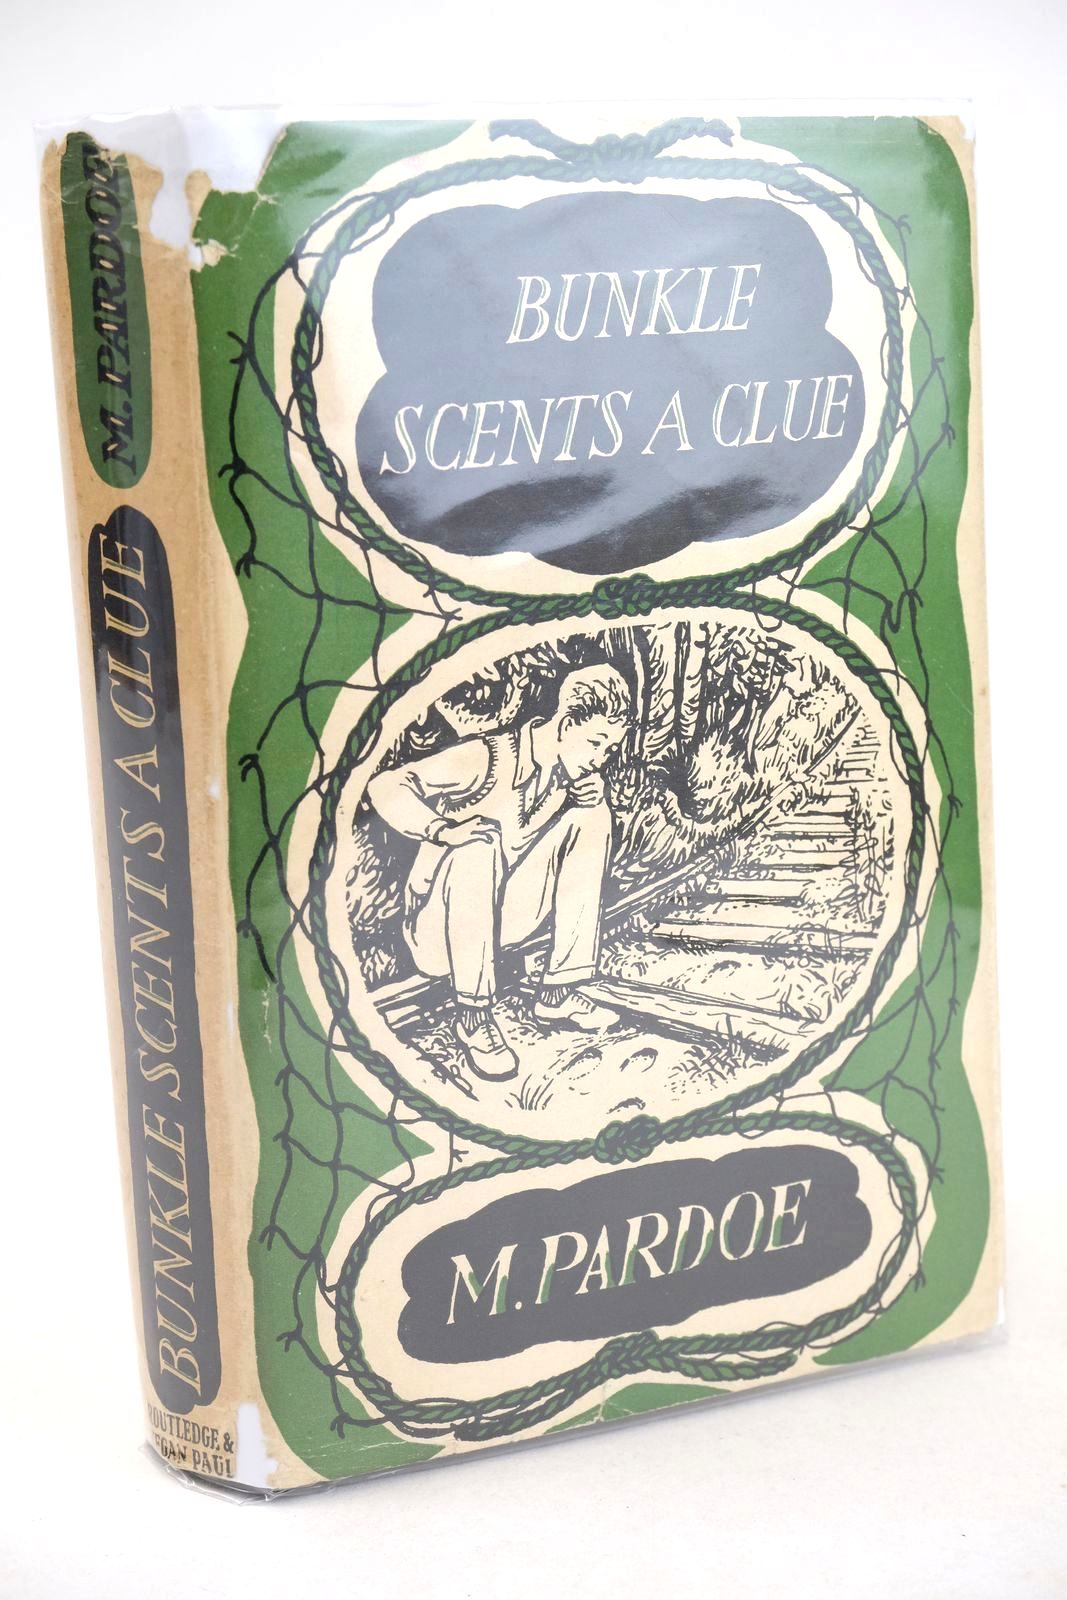 Photo of BUNKLE SCENTS A CLUE written by Pardoe, M. illustrated by Kemp, Pamela published by Routledge &amp; Kegan Paul (STOCK CODE: 1325858)  for sale by Stella & Rose's Books